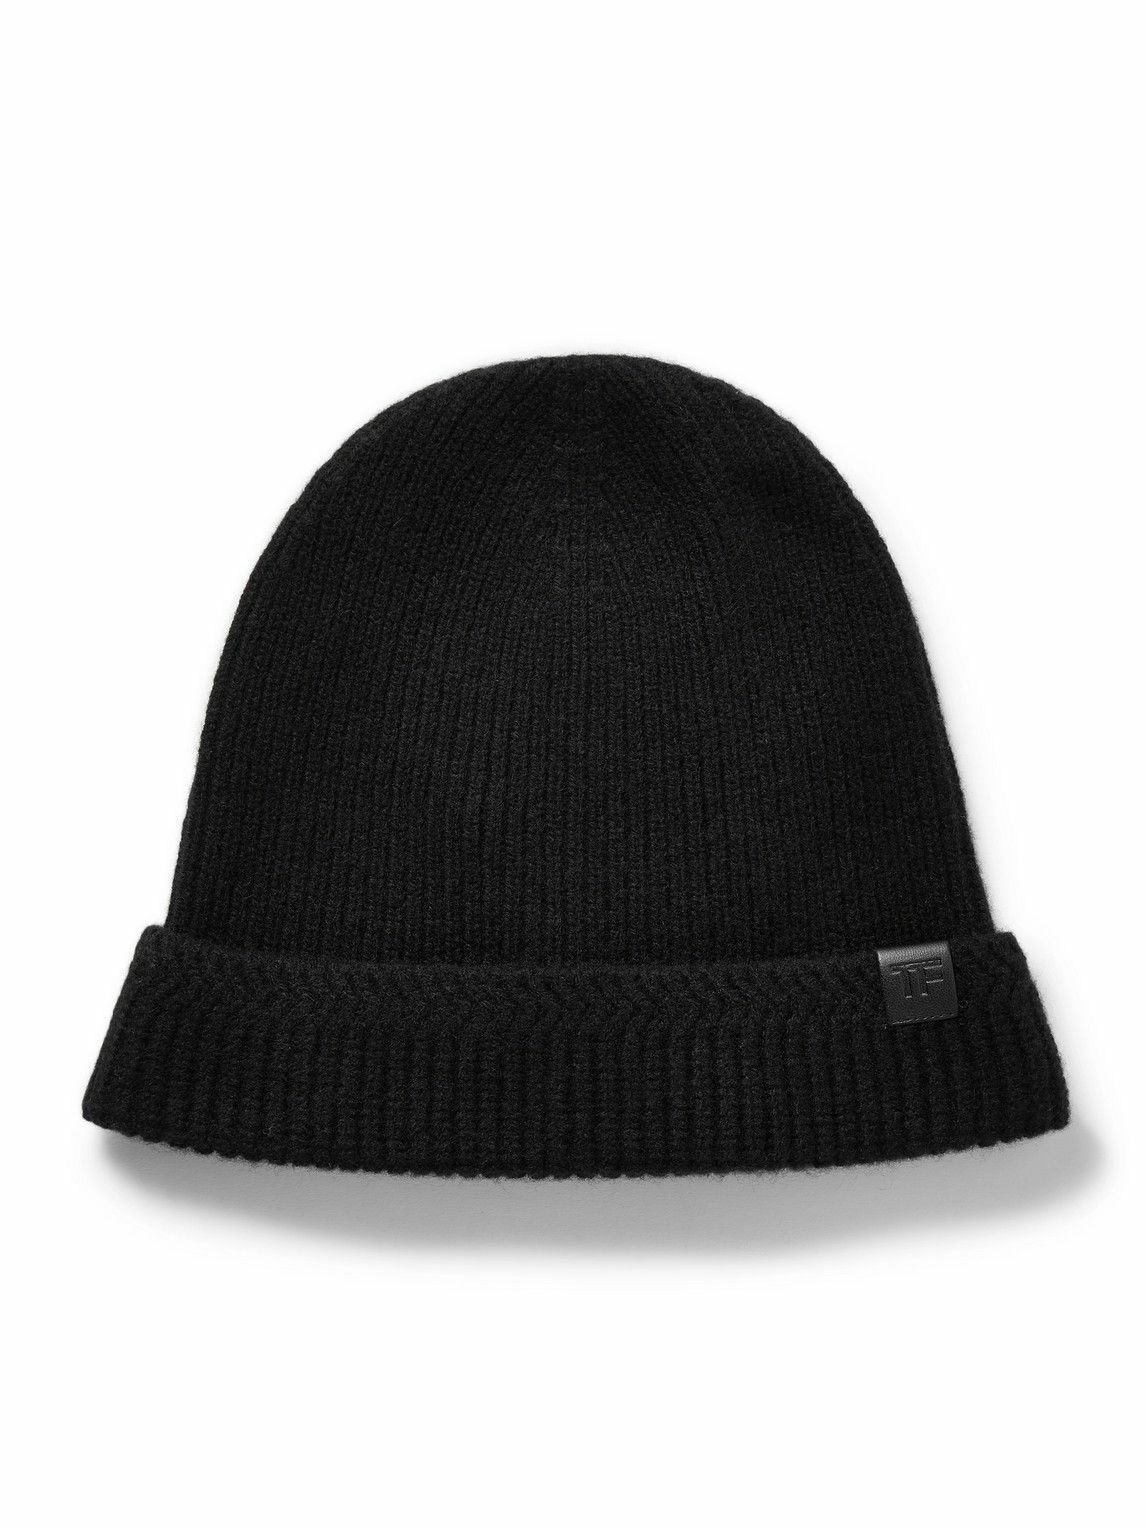 Photo: TOM FORD - Leather-Trimmed Ribbed Wool and Cashmere-Blend Beanie - Black